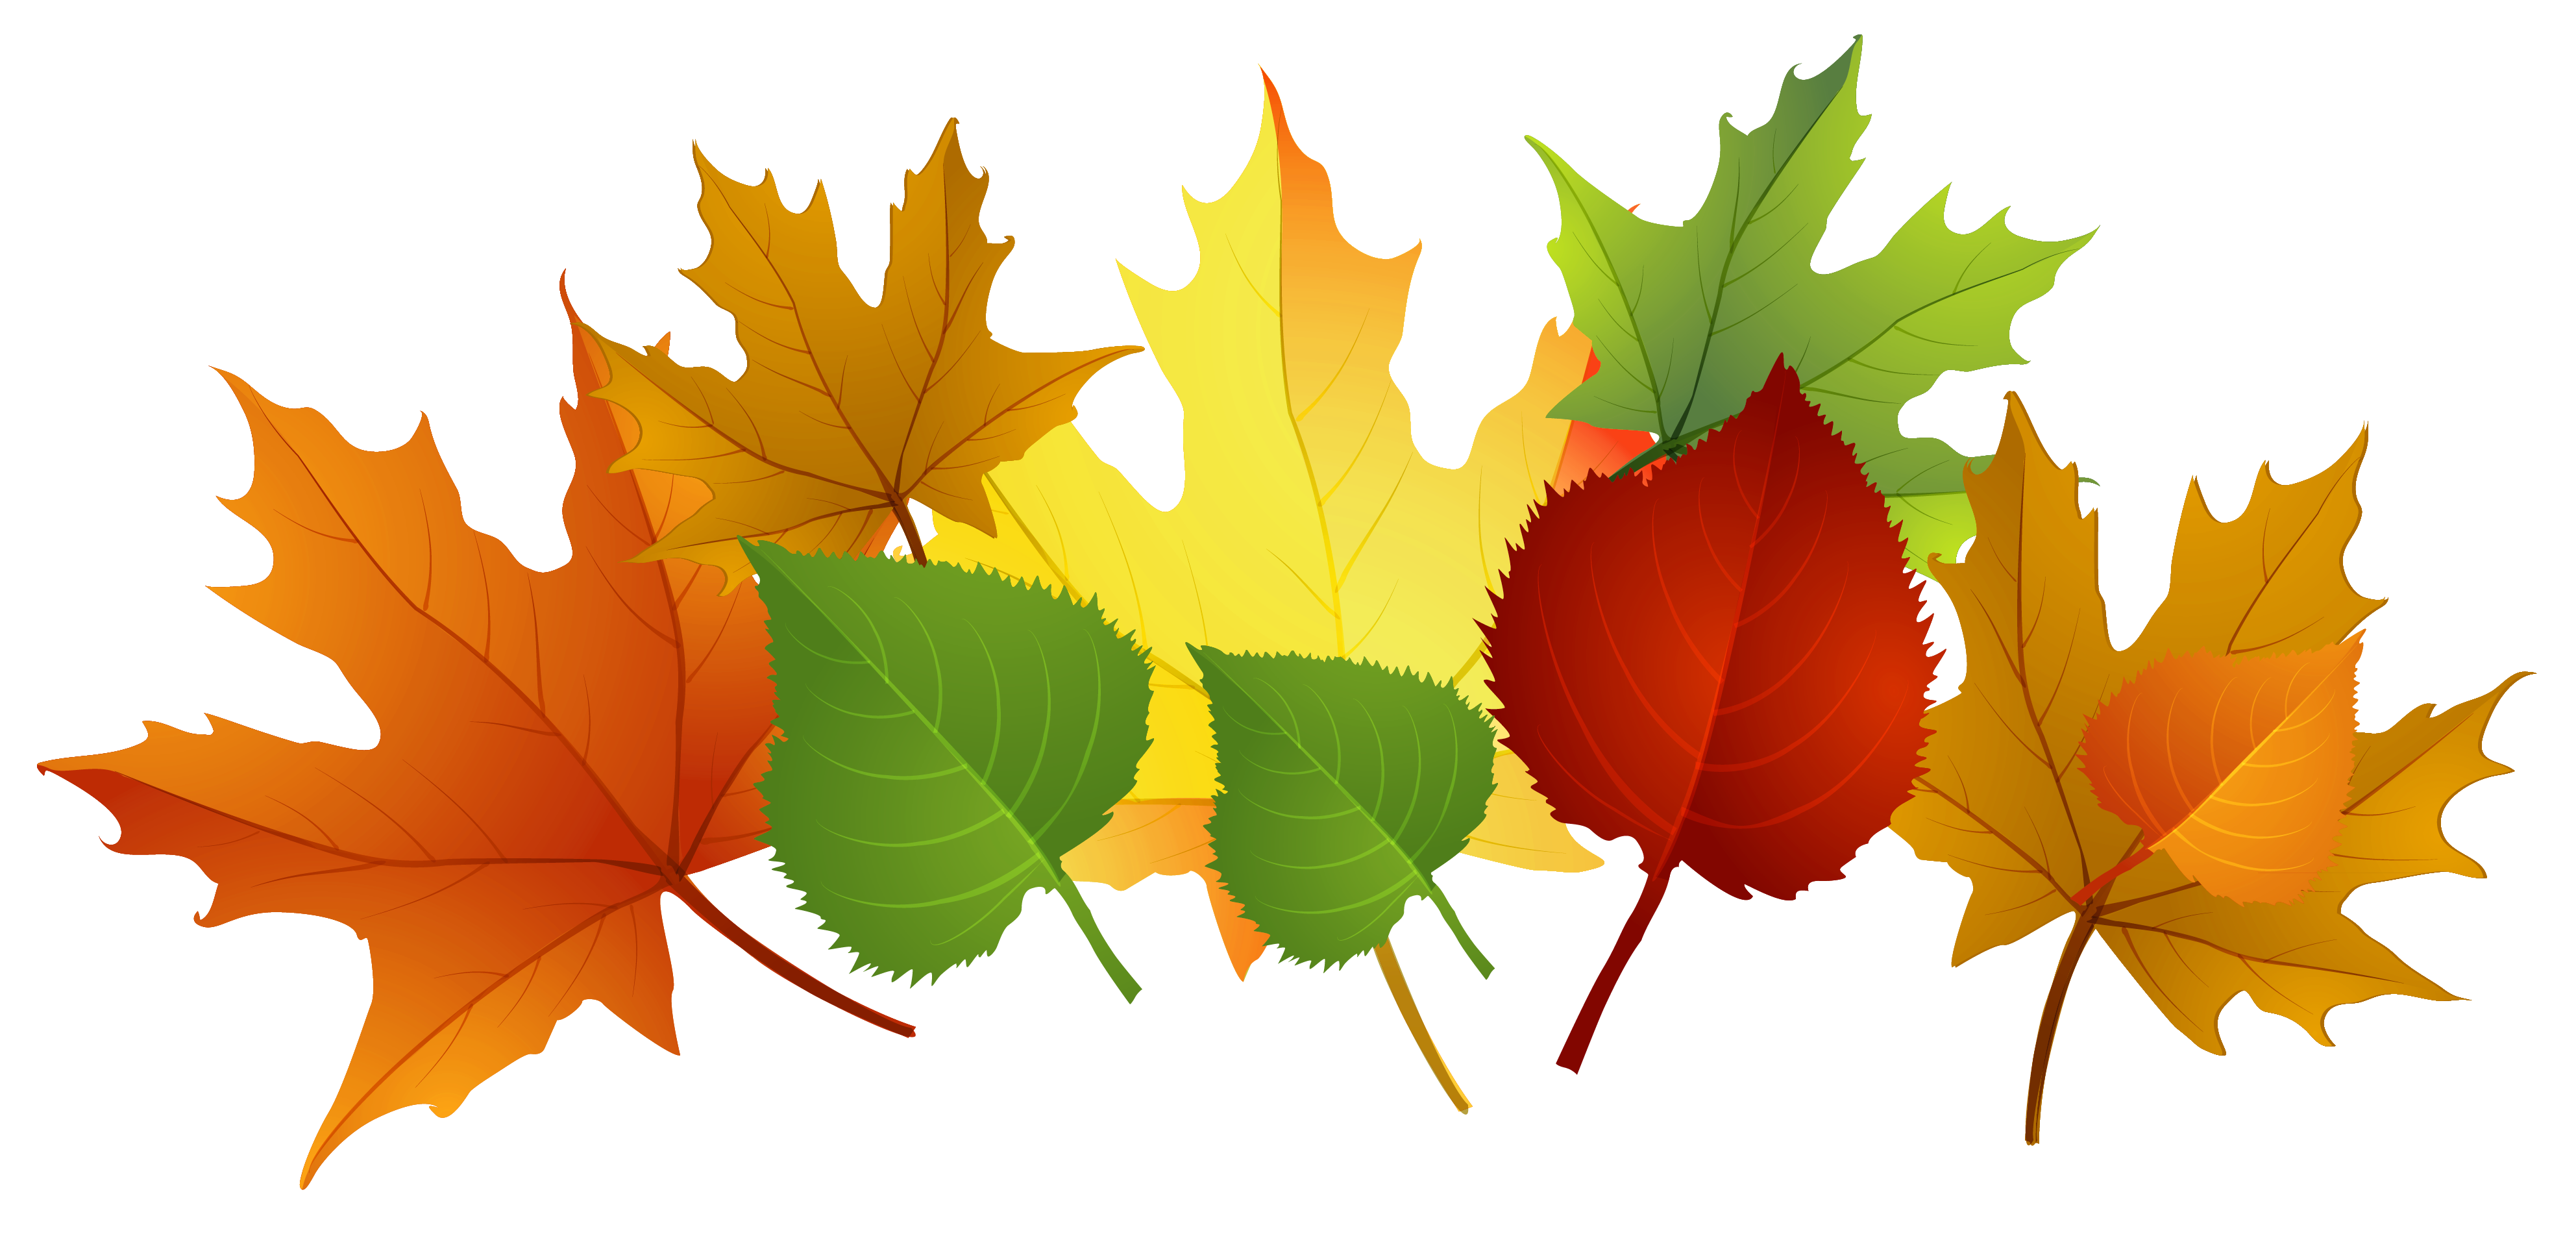 Best Photos of Fall Leaf Clip Art - Fall Leaves Clip Art Free ...